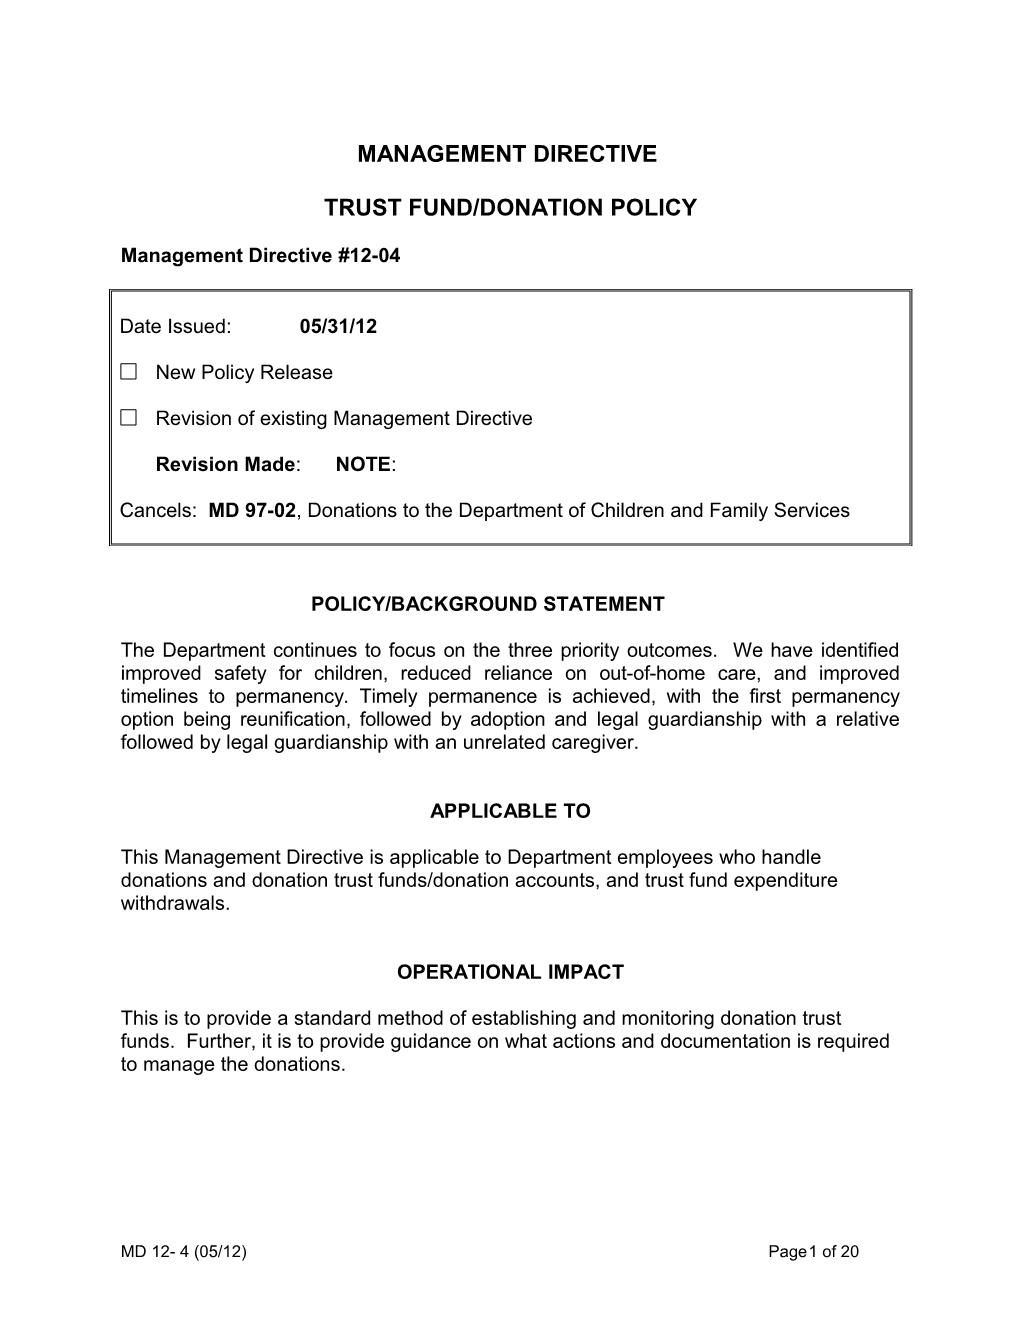 MD 12-04, Trust Fund/Donation Policy